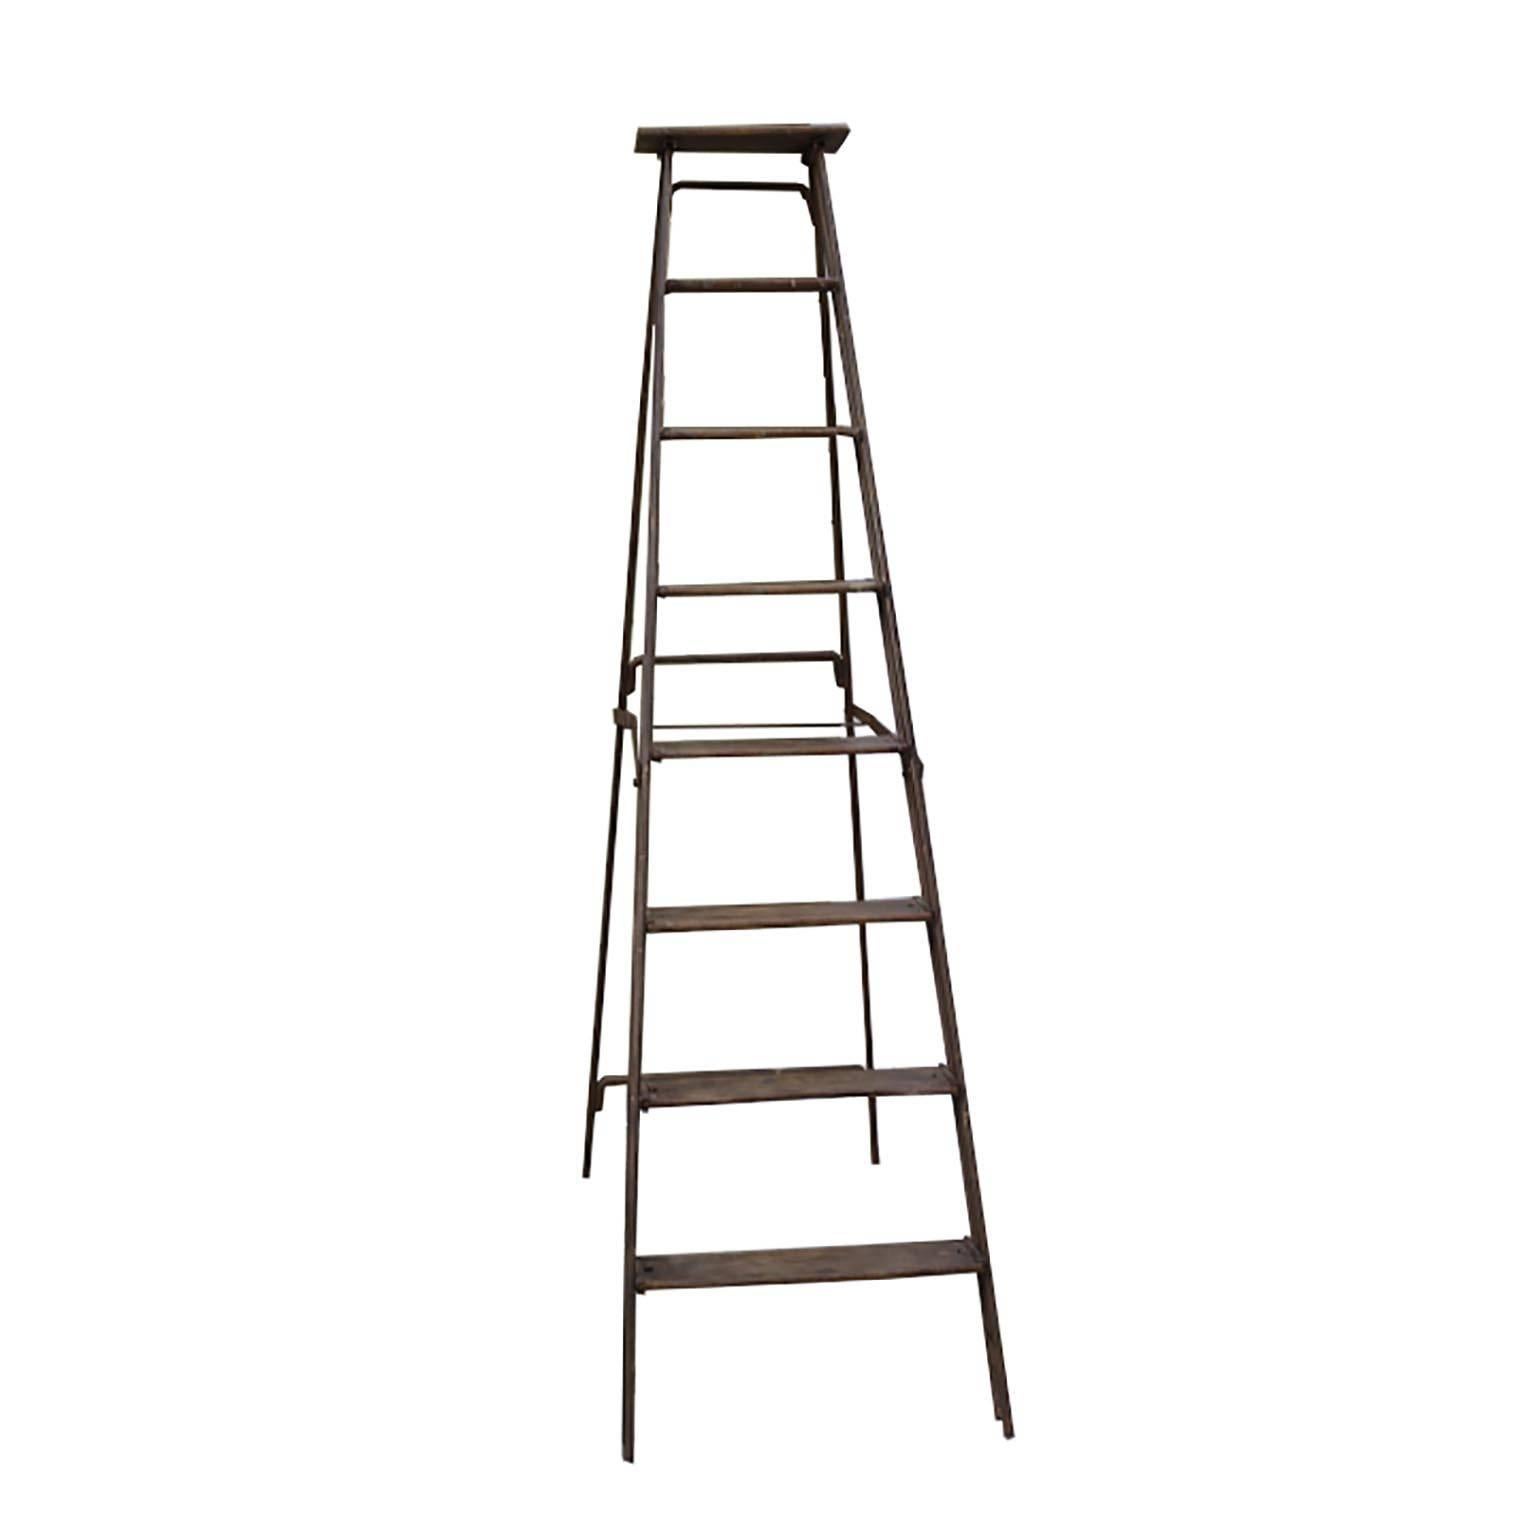 Steel frame ladder with wooden rungs, circa 1930s. Folds in for easy storage. The two bottom rungs are slightly loose.
The ladder itself can be used to climb. Does have a slight wobble.